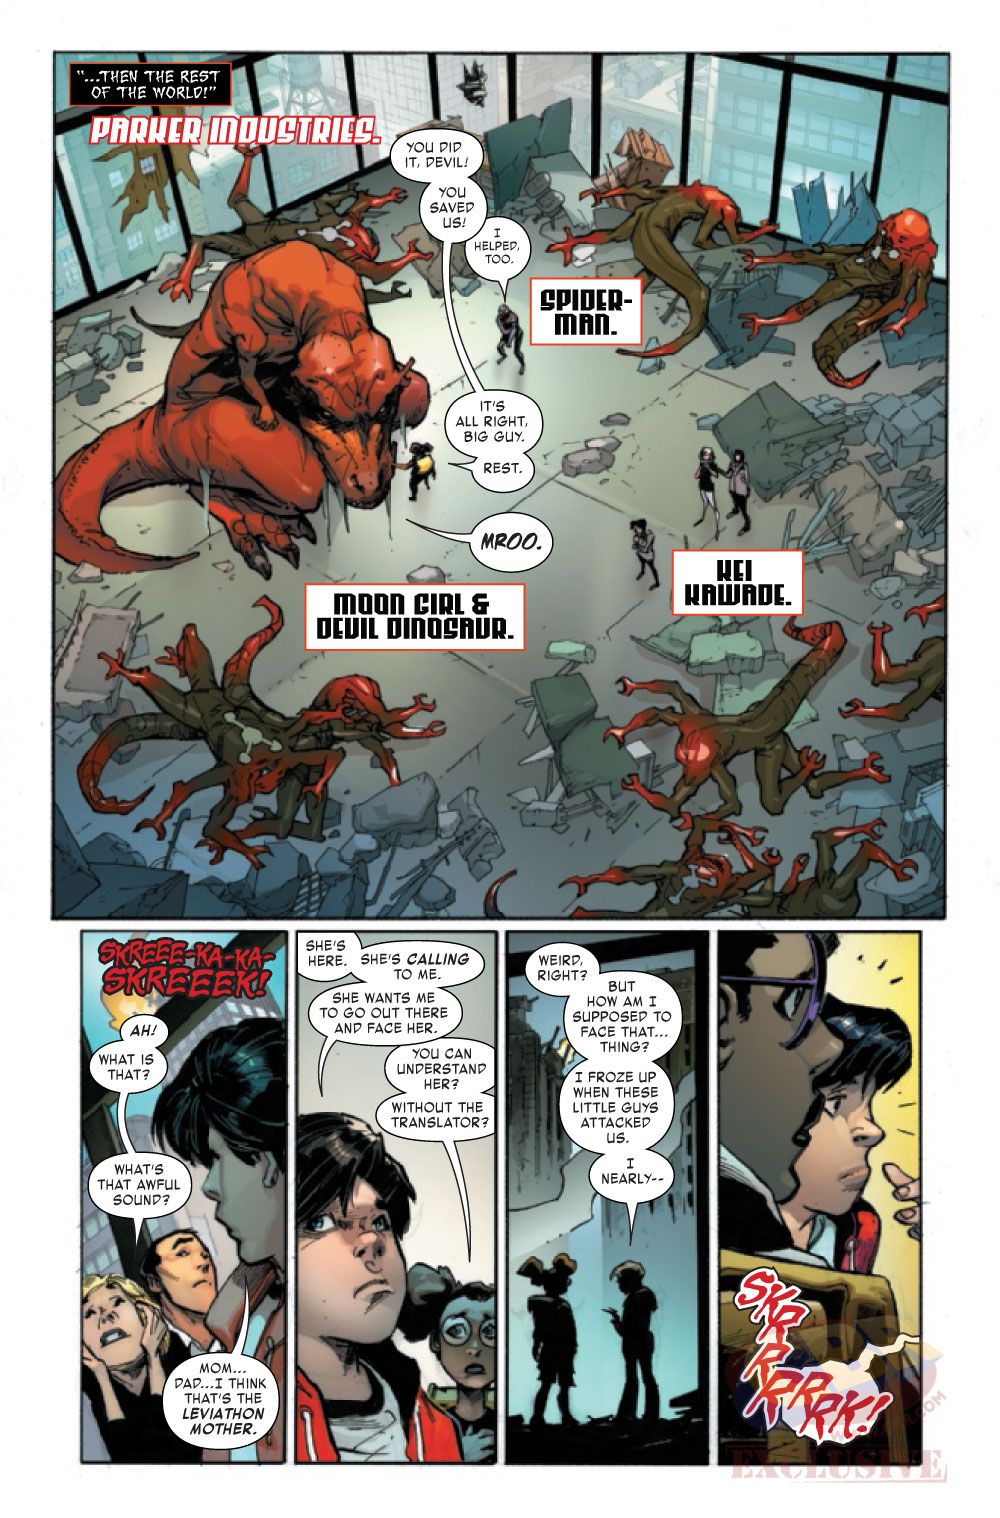 Monsters Unleashed #5